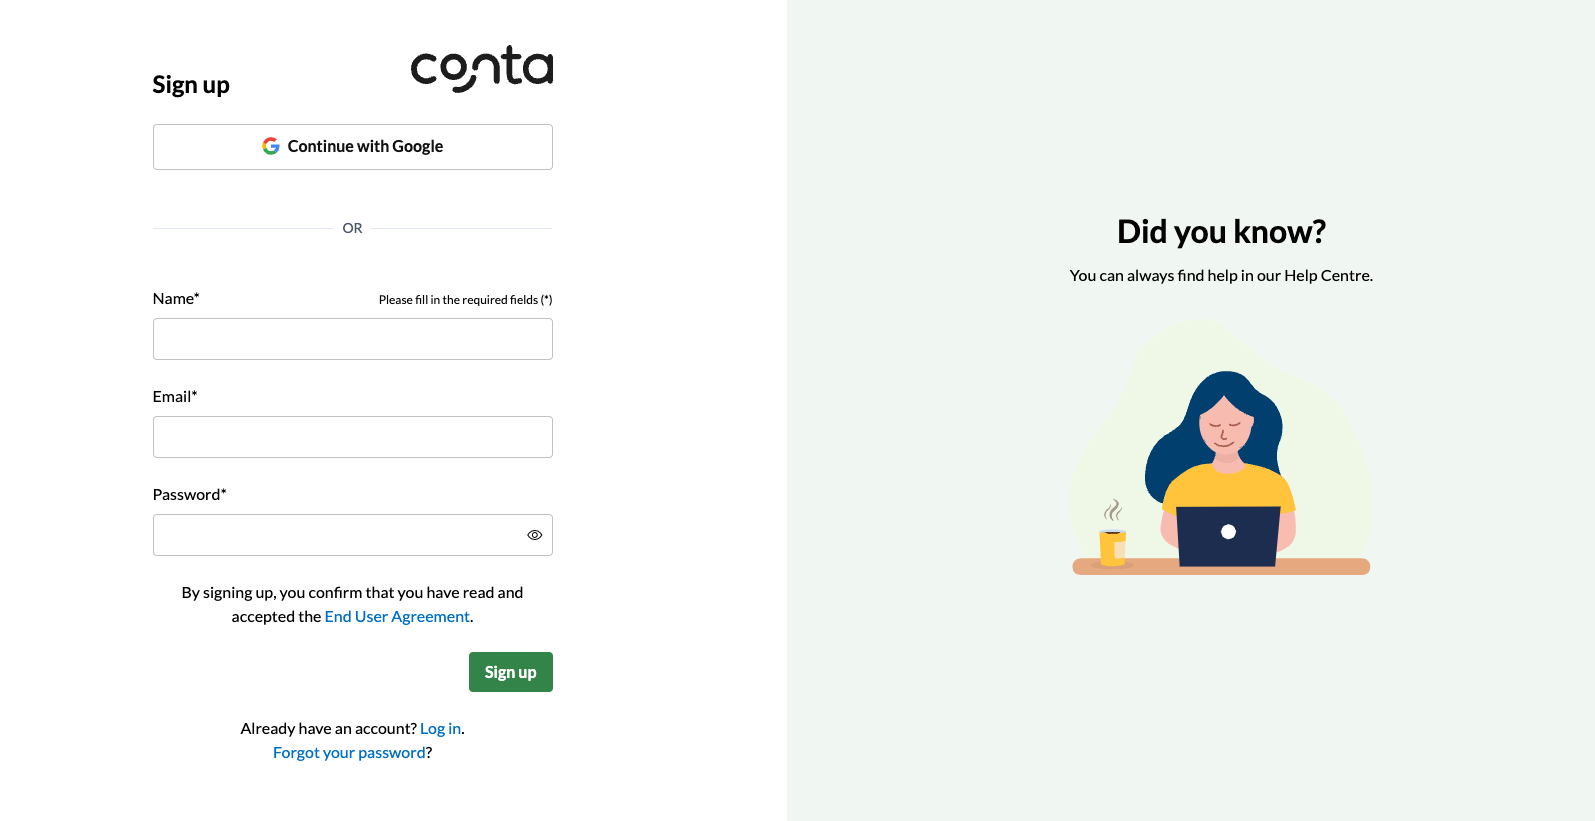 The sign up page in Conta, where you create your account or log in with Google